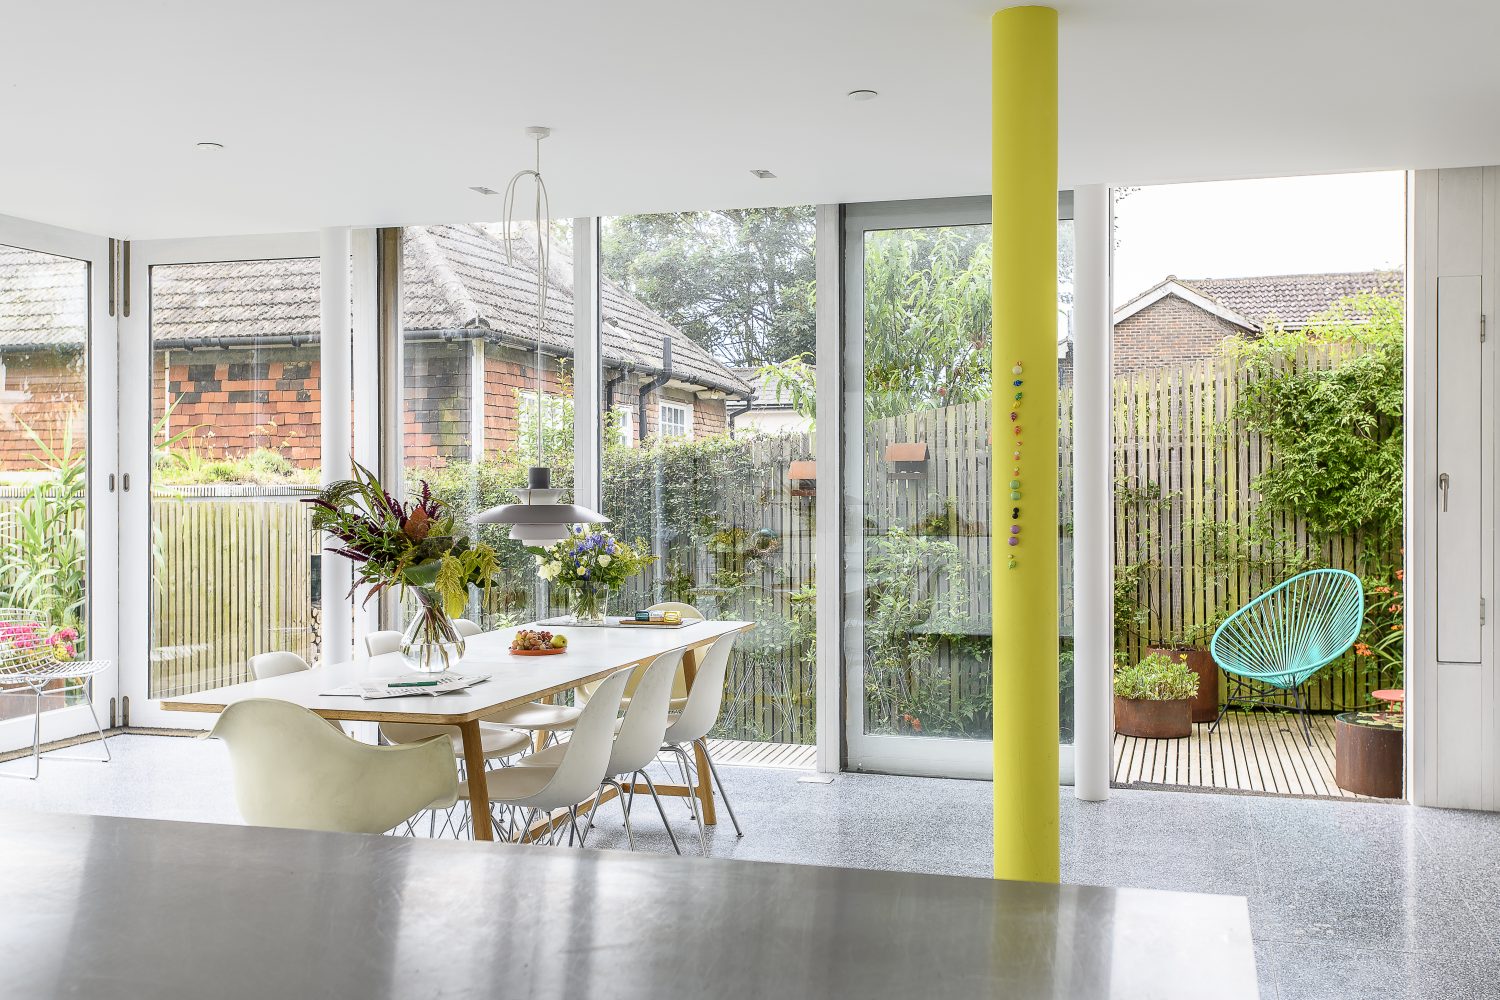 A wall of glass allows views over the paved and planted front garden